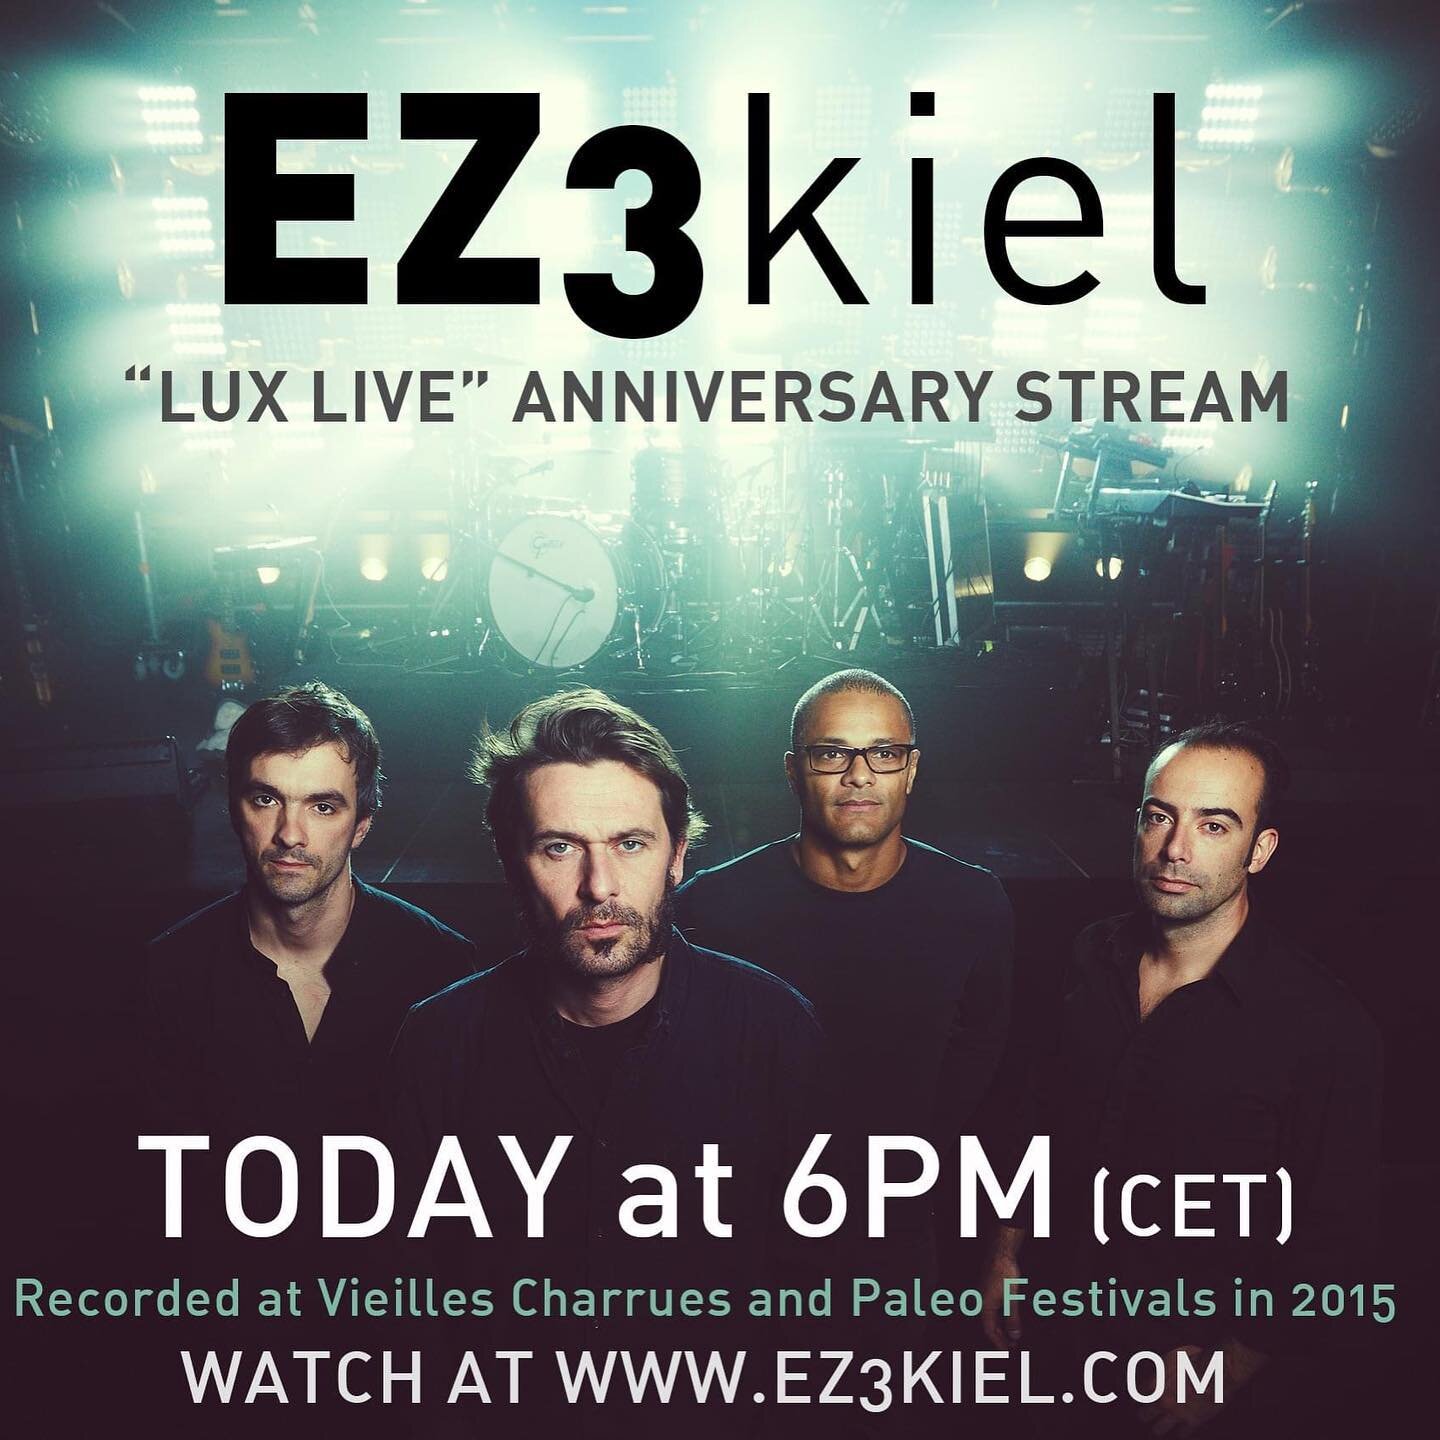 LUX LIVE ANNIVERSARY STREAM !
🎥=&gt;Vieilles Charrues &amp; Paléo Festivals in 2015
📆=&gt;TODAY at 6PM (CET) AT WWW.EZ3kiel.COM

Come and chat with us during the stream on the Youtube video !
See you soon
EZ3kiel